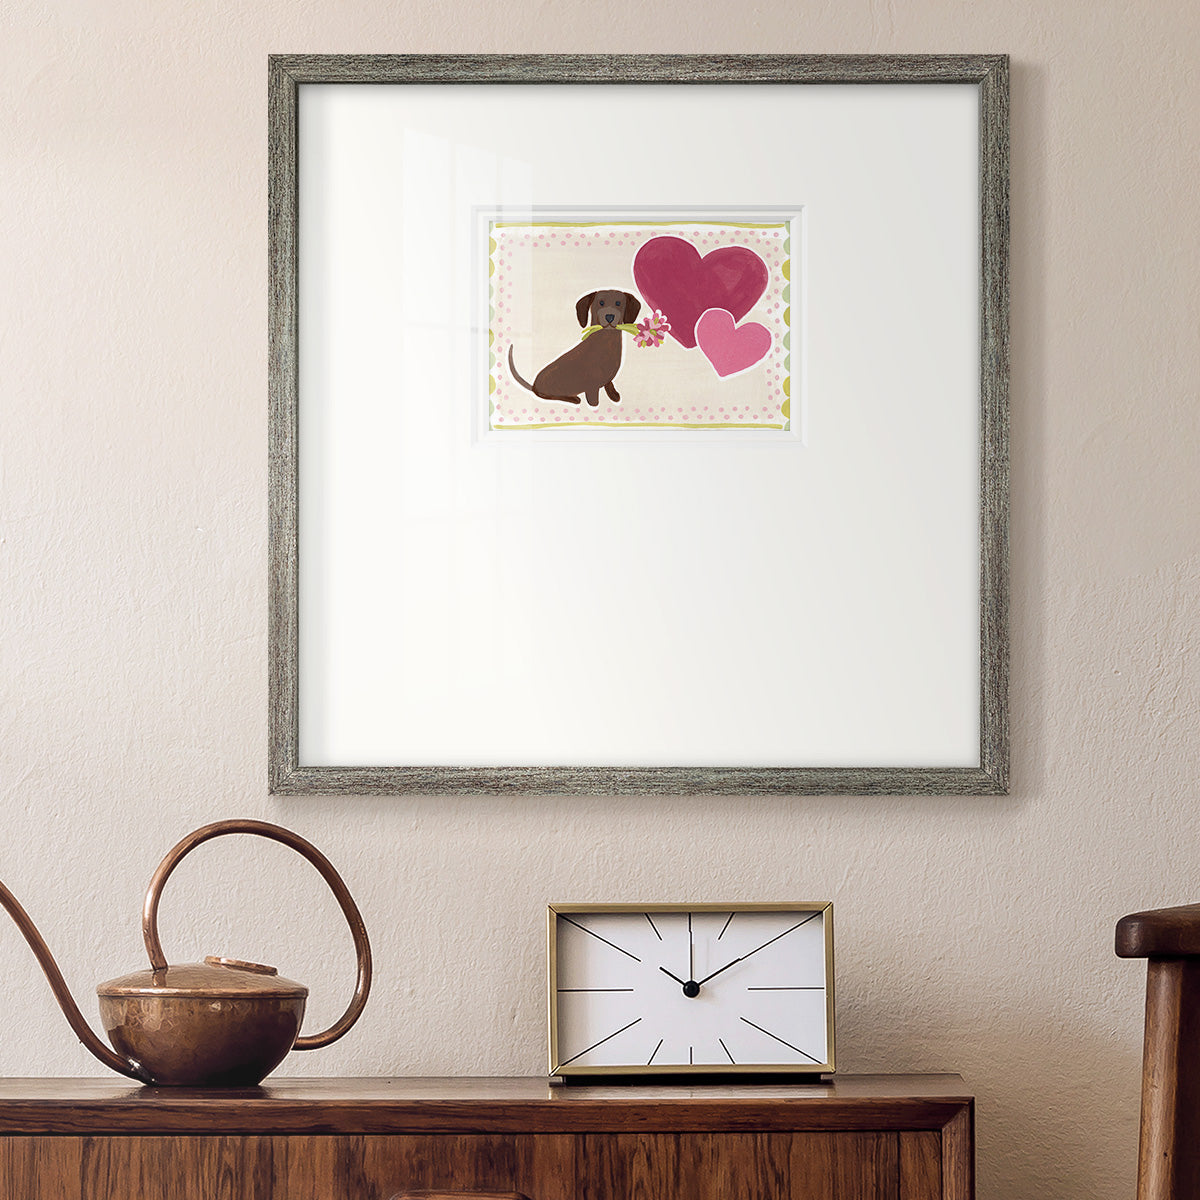 Dachshund Delight Collection A Premium Framed Print Double Matboard